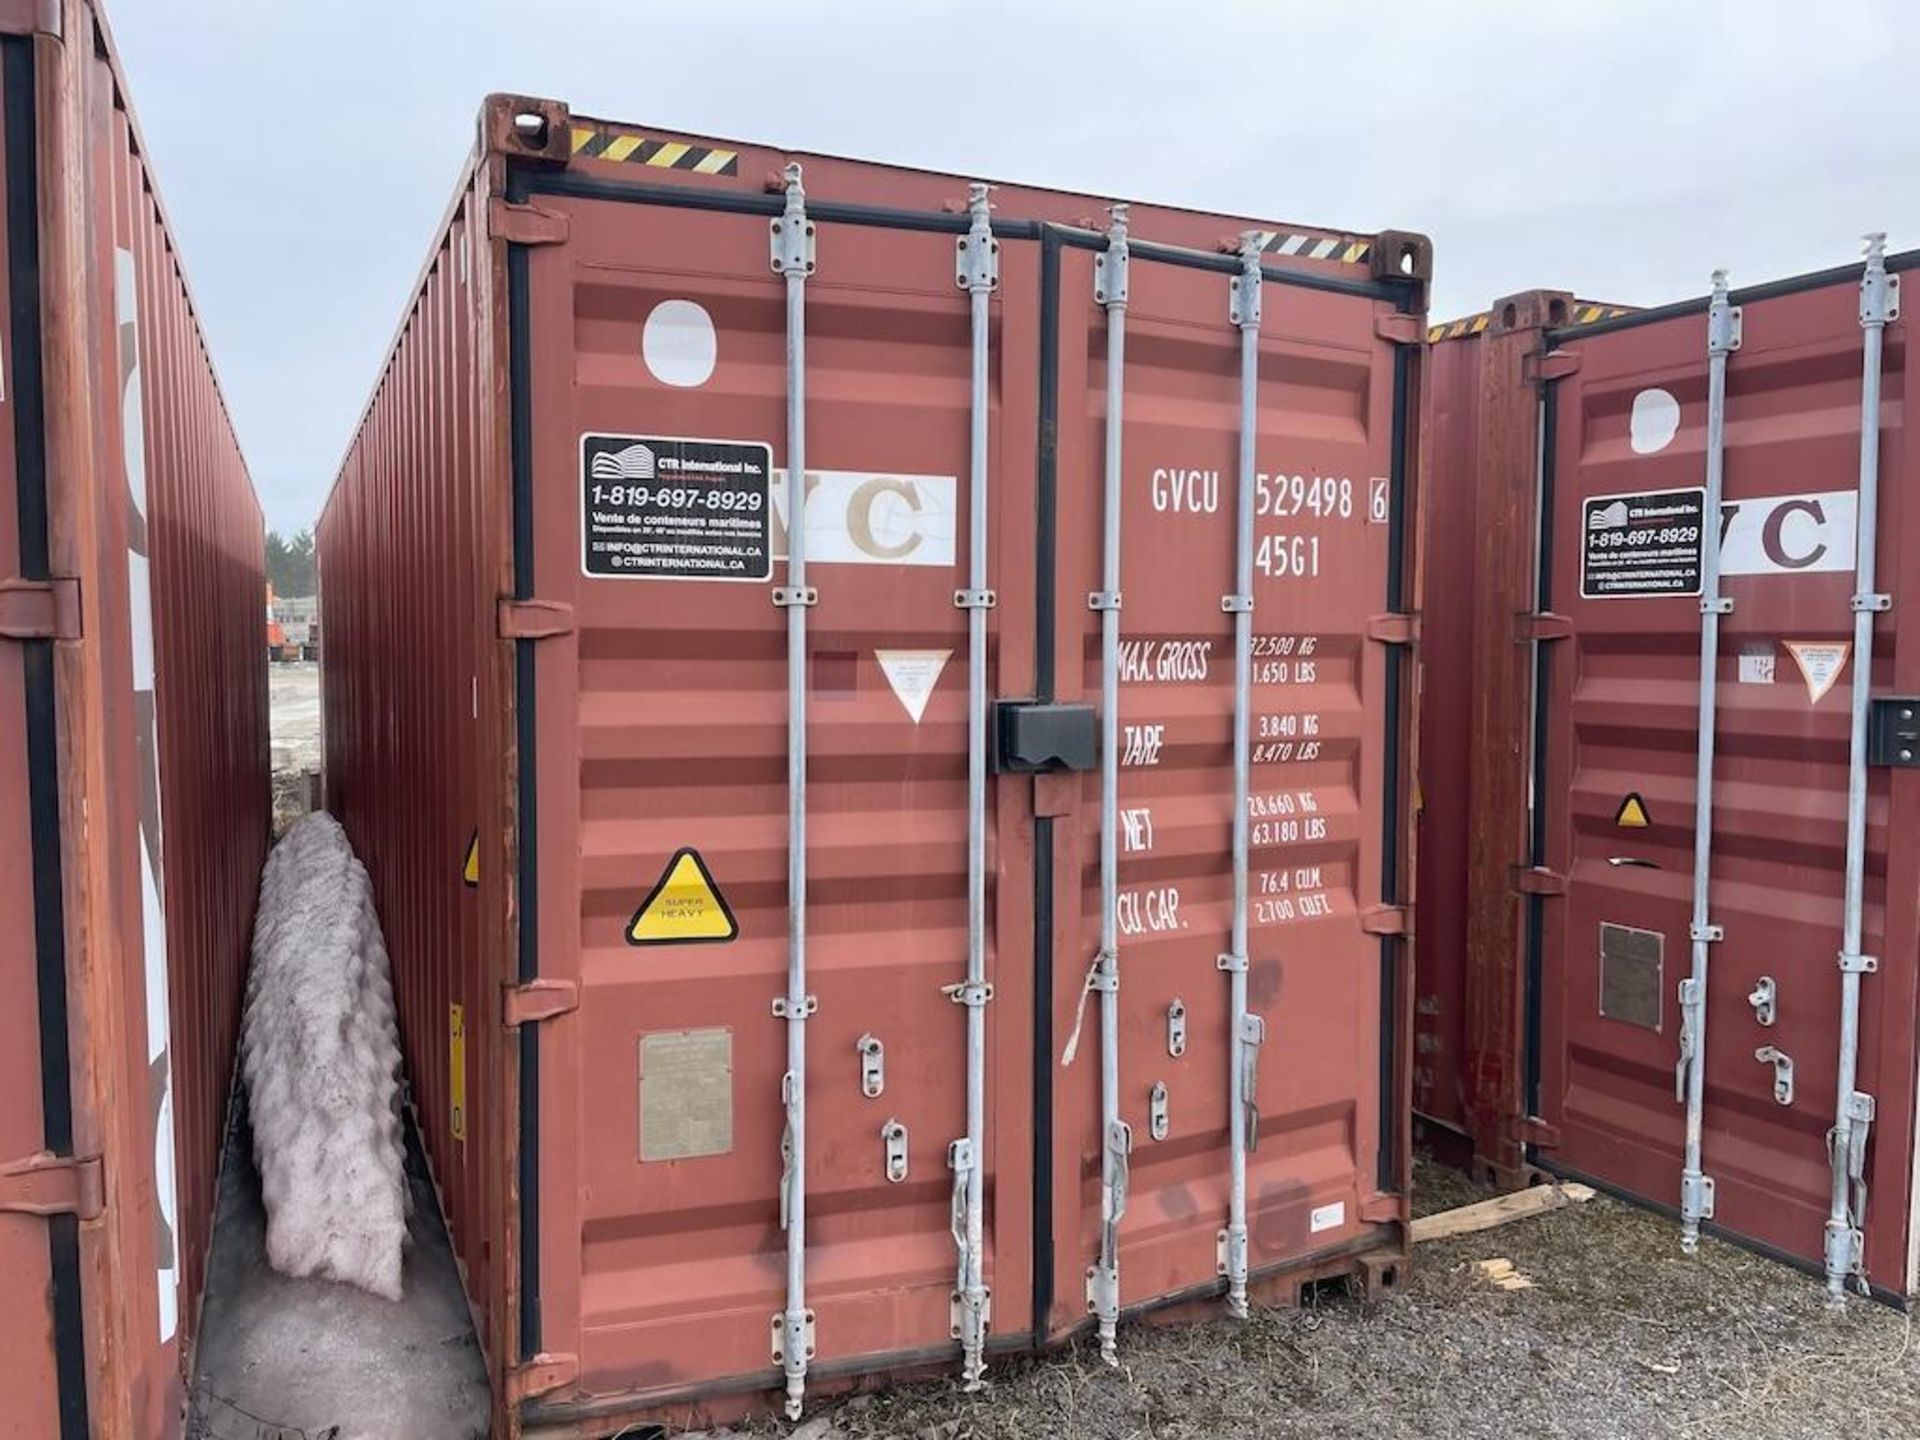 40 FT SEA CONTAINER, EXCLUDING CONTENTS, DELAYED PICK UP UNTIL MAY 13 [5] [TROIS RIVIERES] *PLEASE N